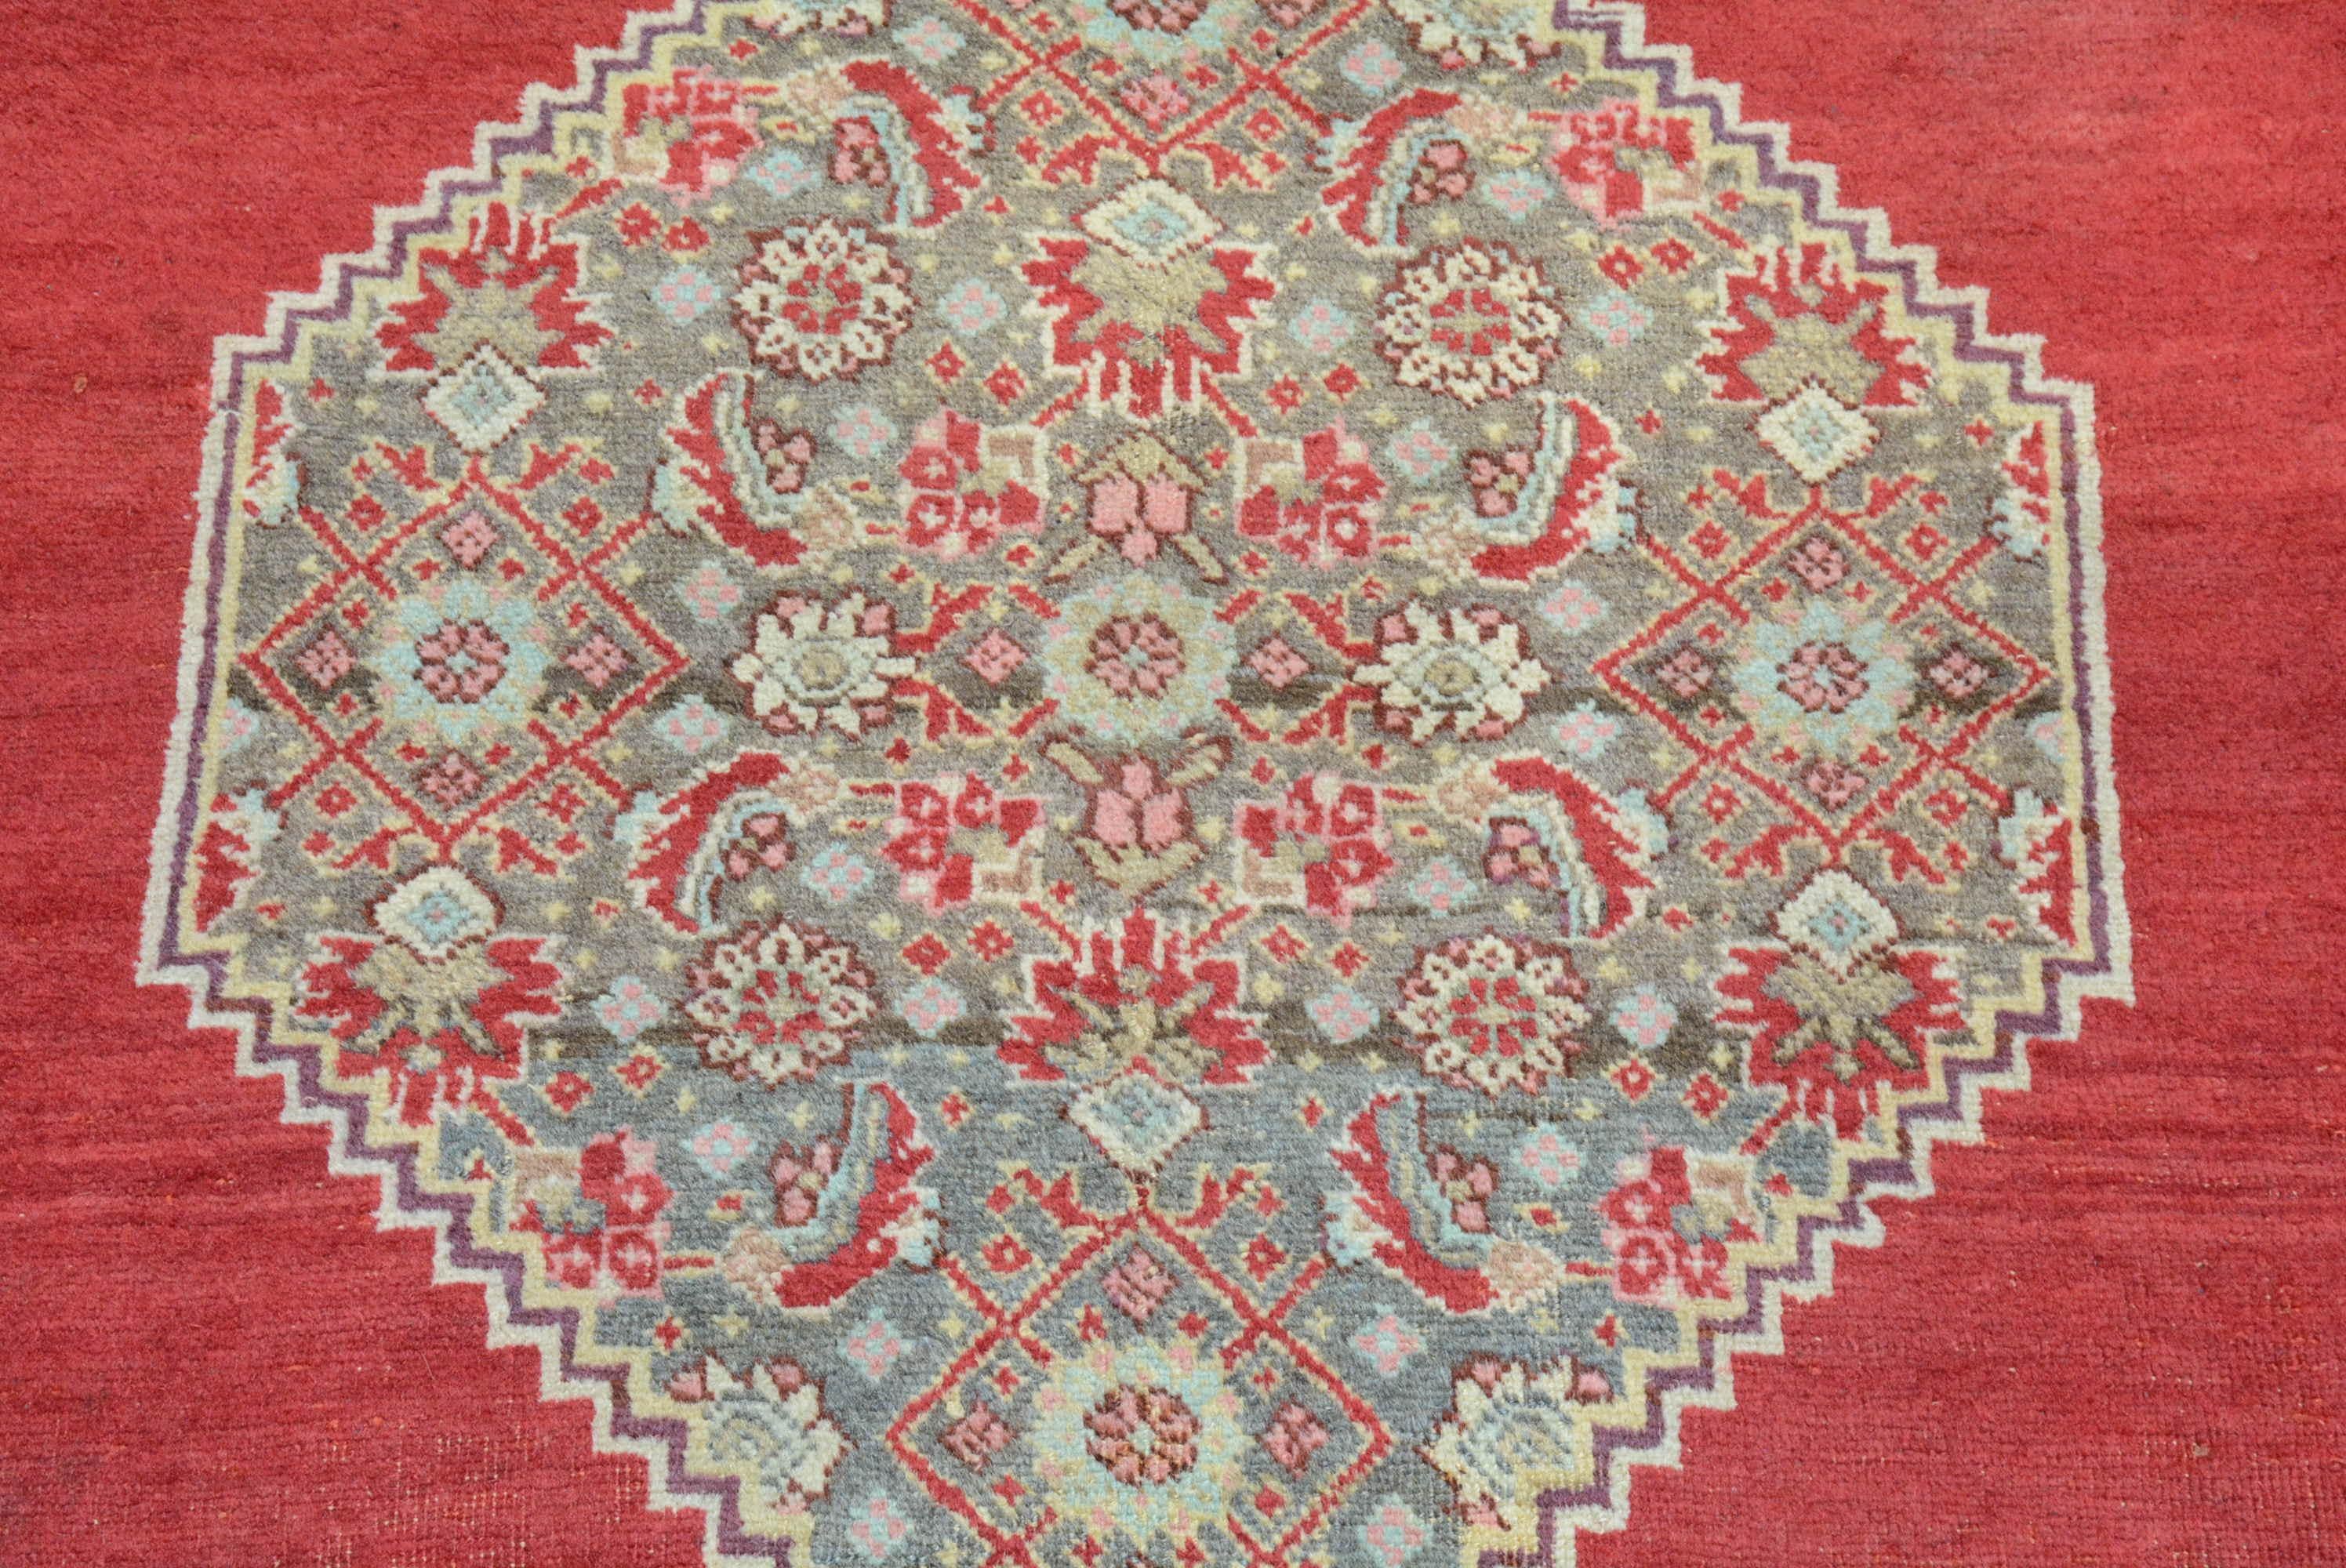 The city of Tabriz in northwest Persia is acknowledged as central to the revival of the carpet industry in the late 19th Century. Merchants from this area were well aware of the demand for Middle Eastern decorative objects from the west, and the